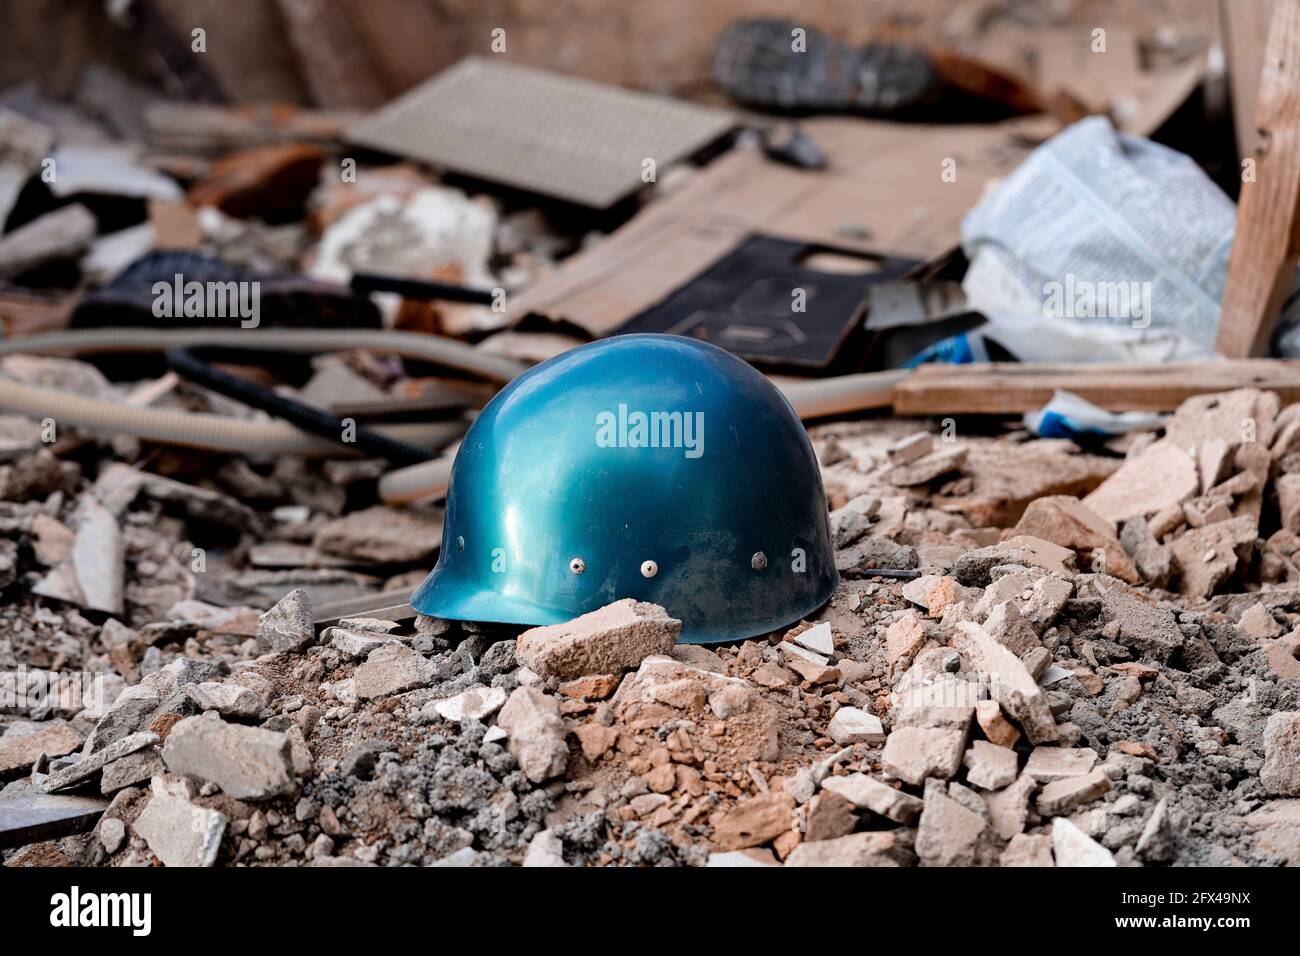 A helmet on a pile of debris. Warzone concept image. Stock Photo